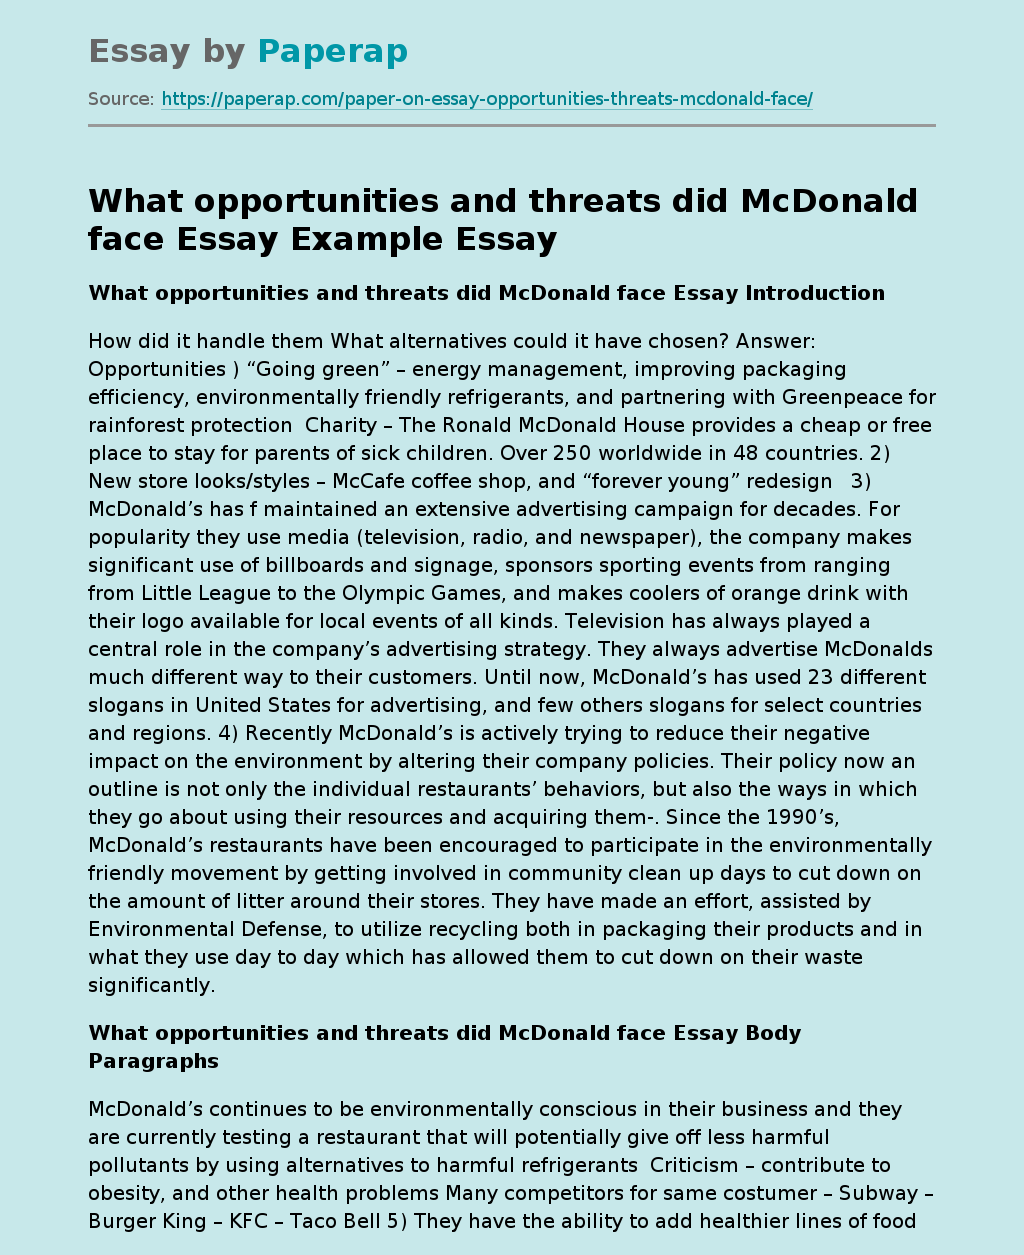 What opportunities and threats did McDonald face Essay Example